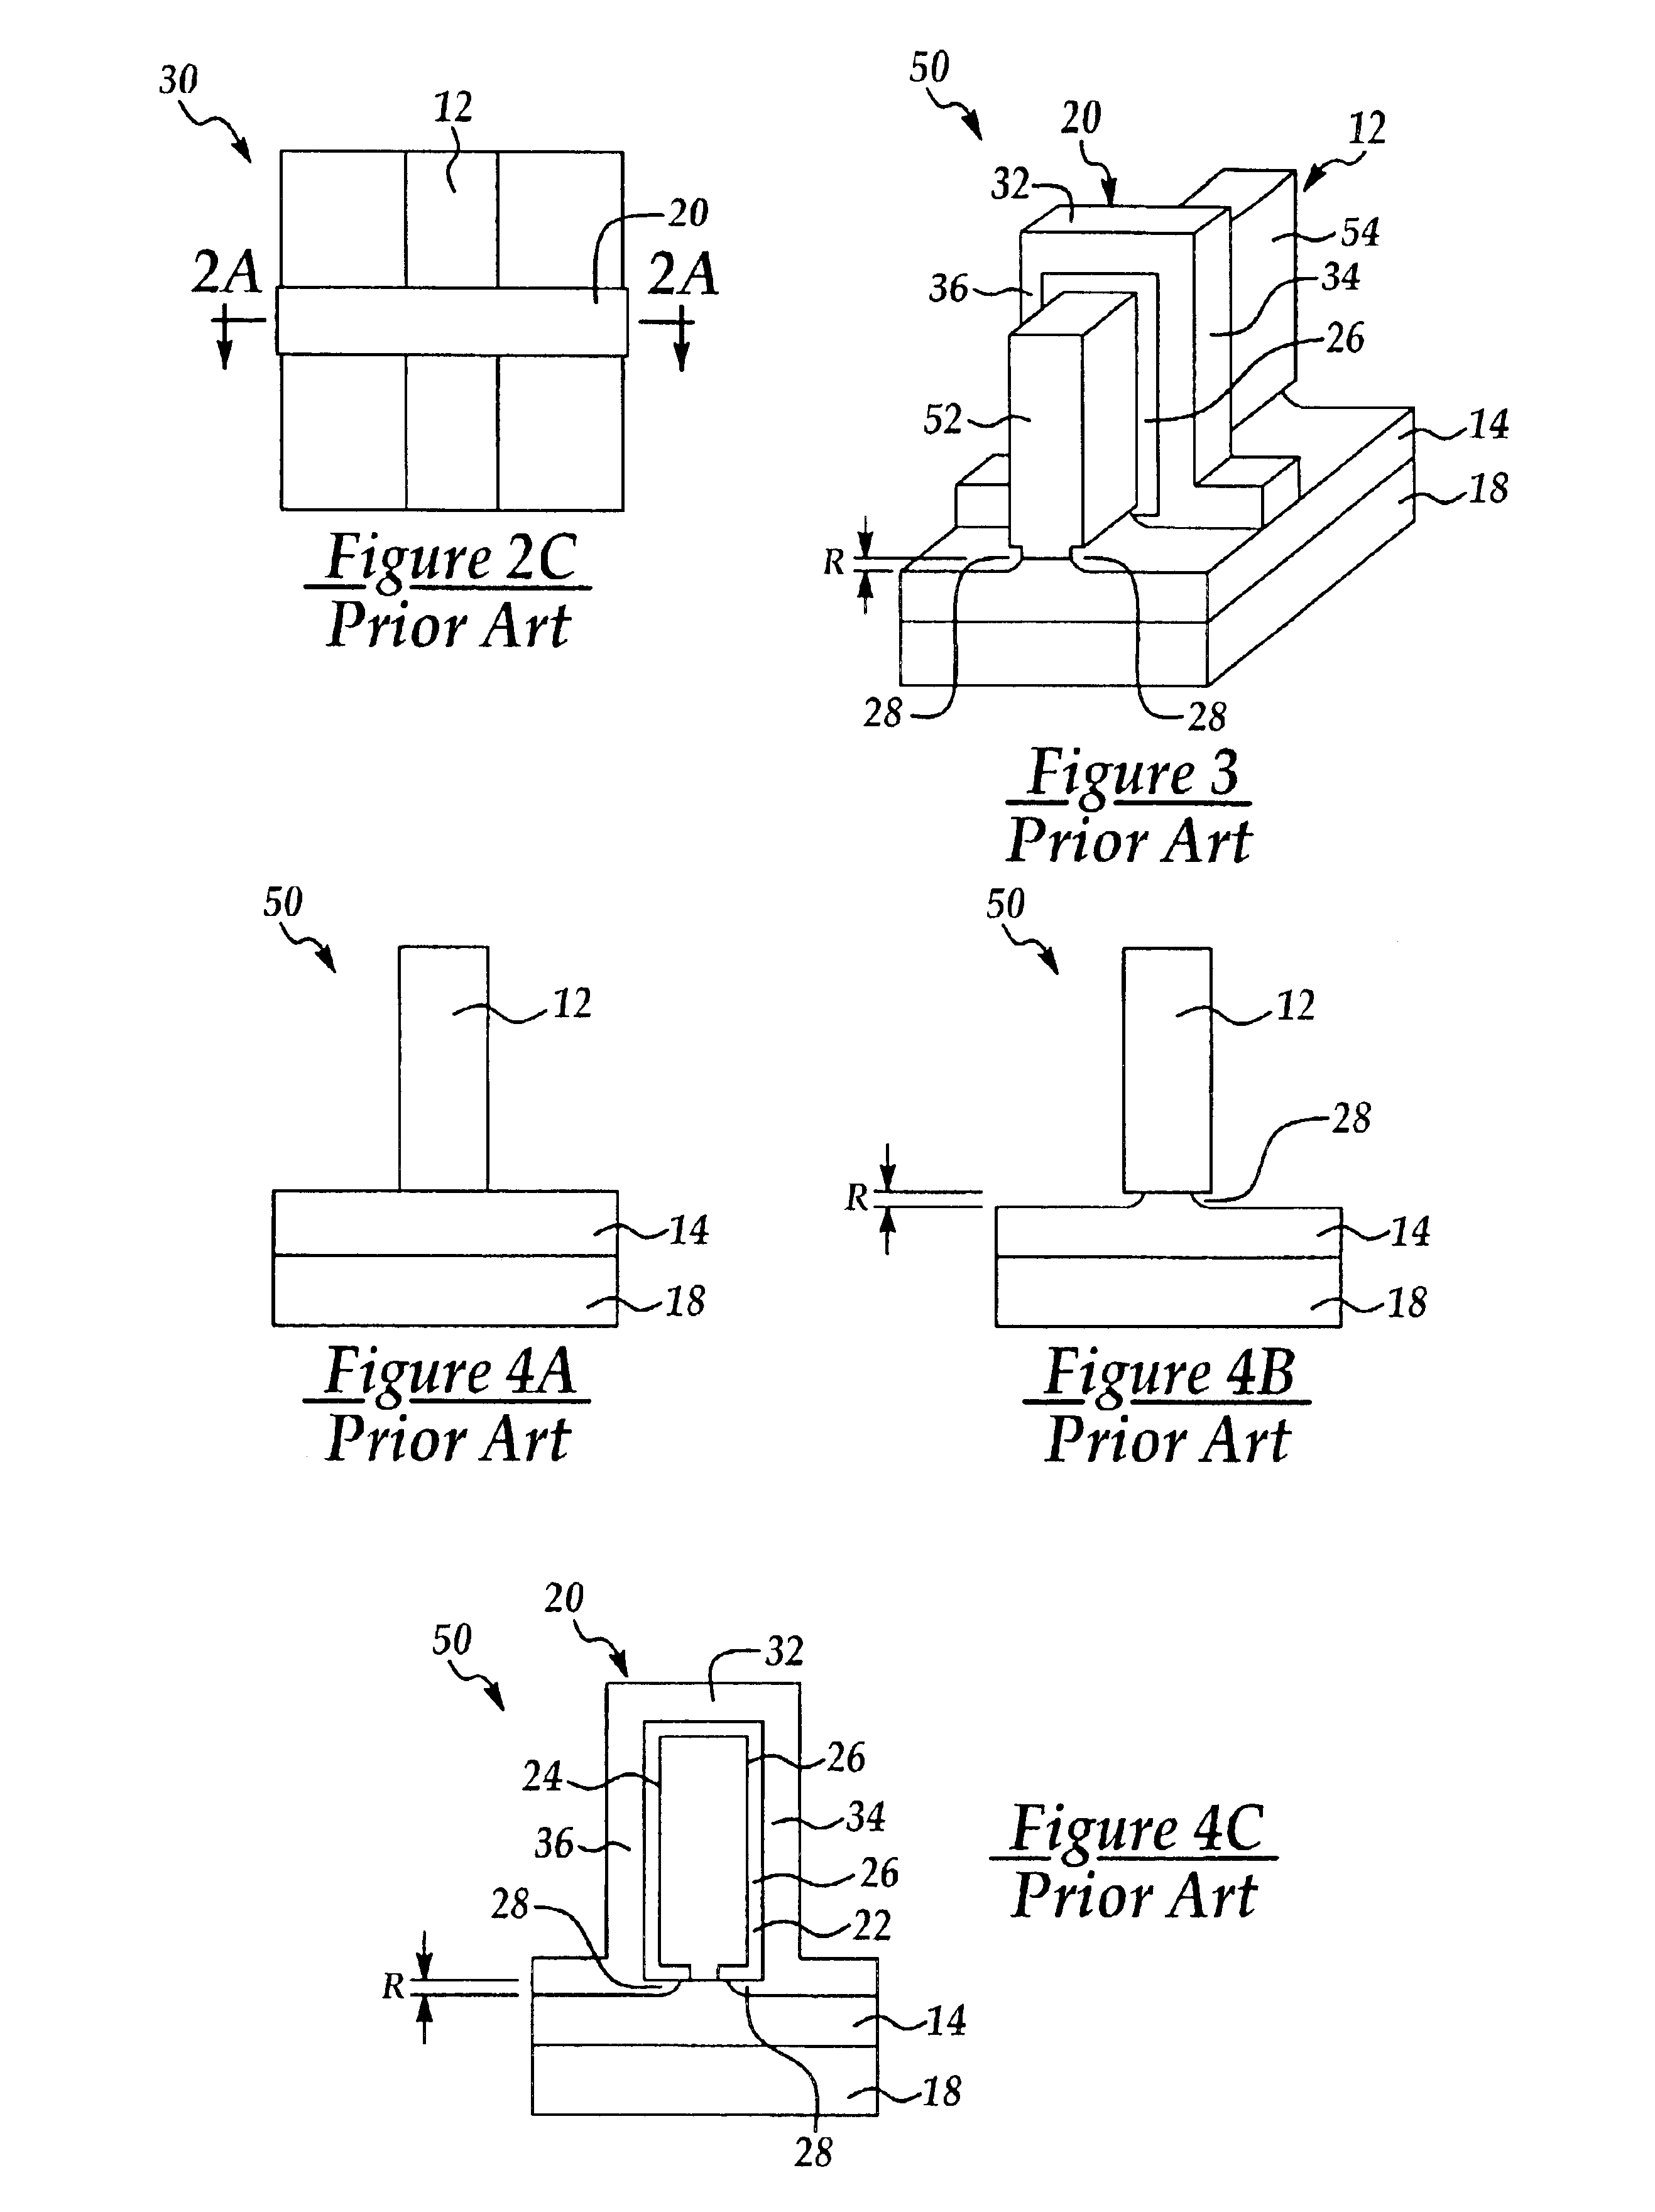 Multiple-gate transistors with improved gate control